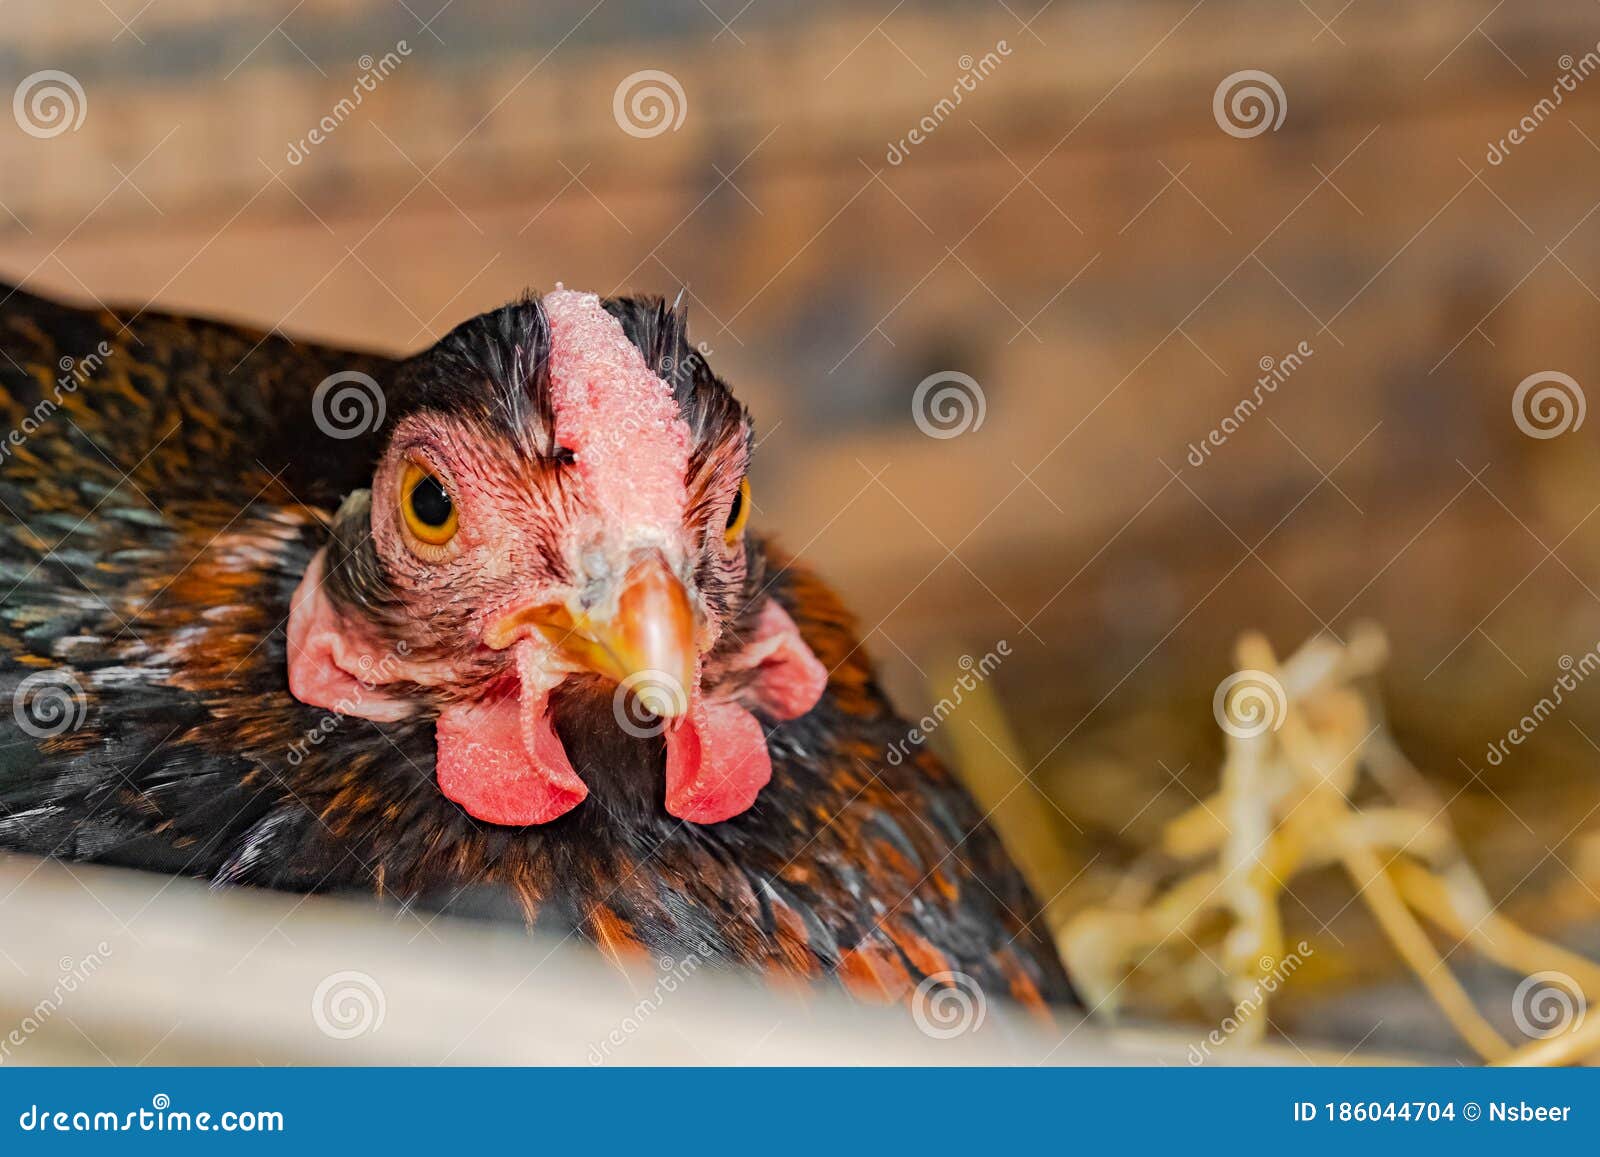 shallow focus of a broody free range hen seen sitting on a clutch of eggs in a makeshift hen house